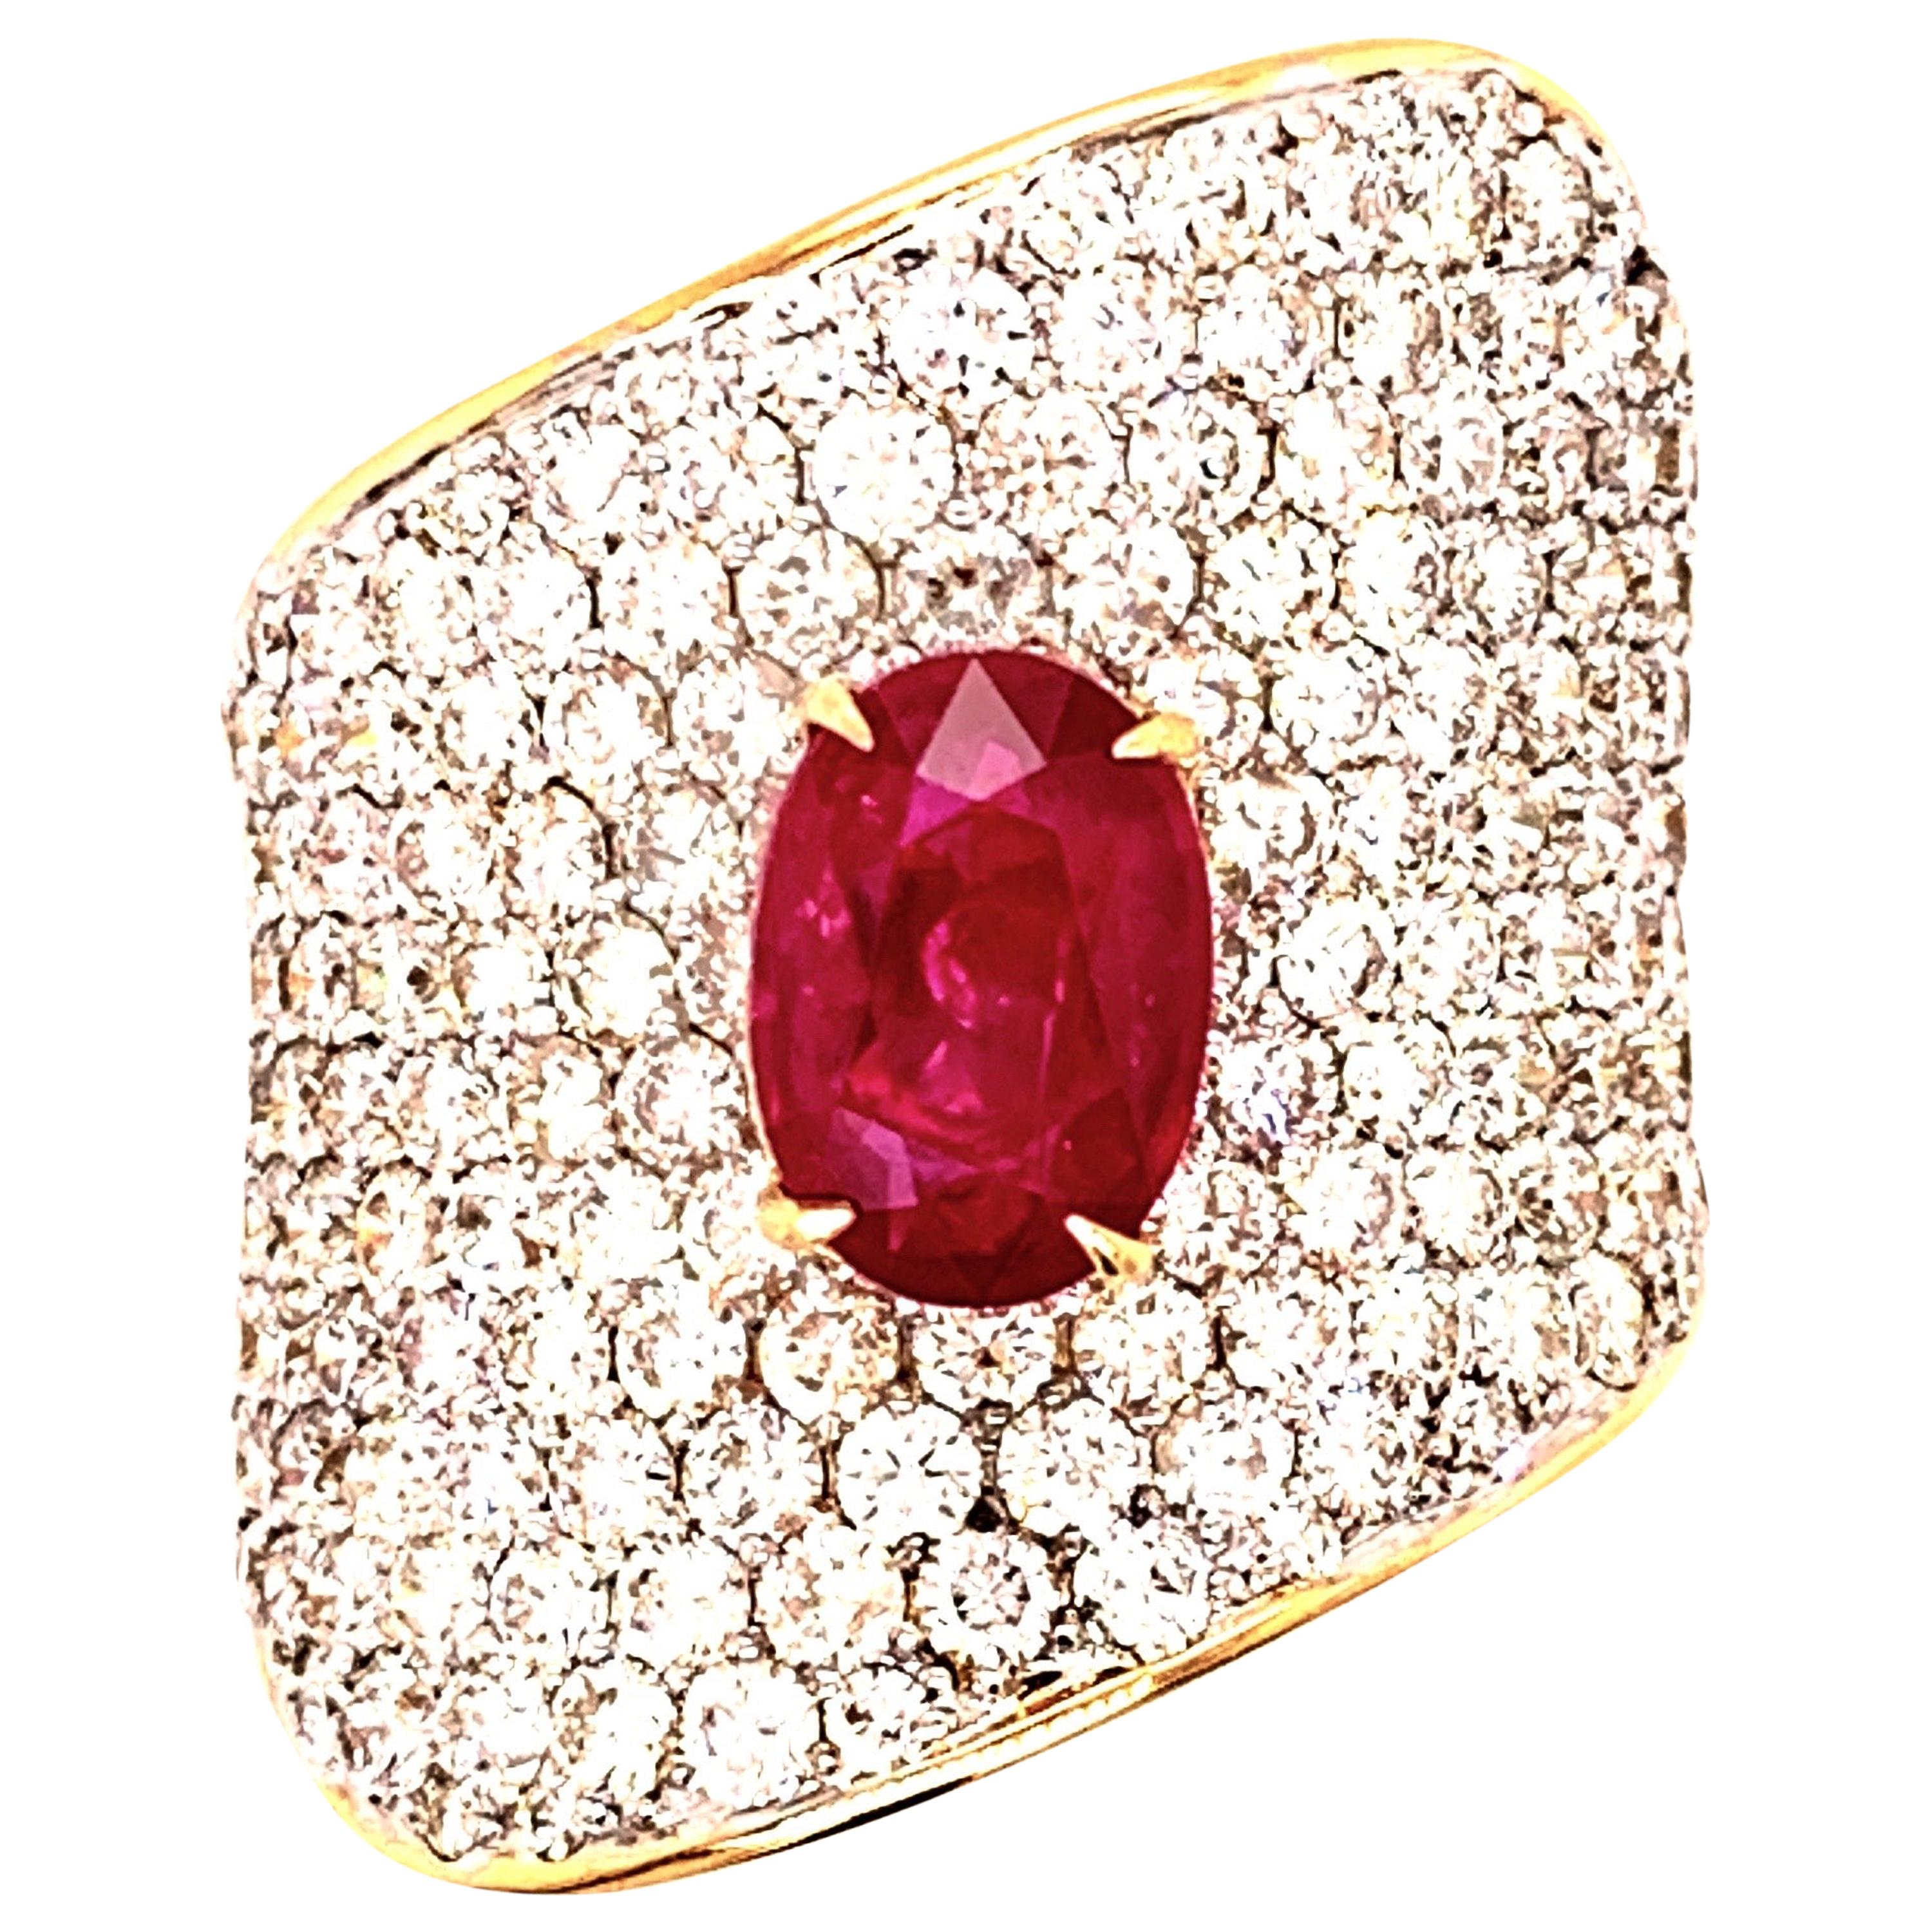 2.02 Carat Unheated Ruby Diamond Cocktail Ring For Sale